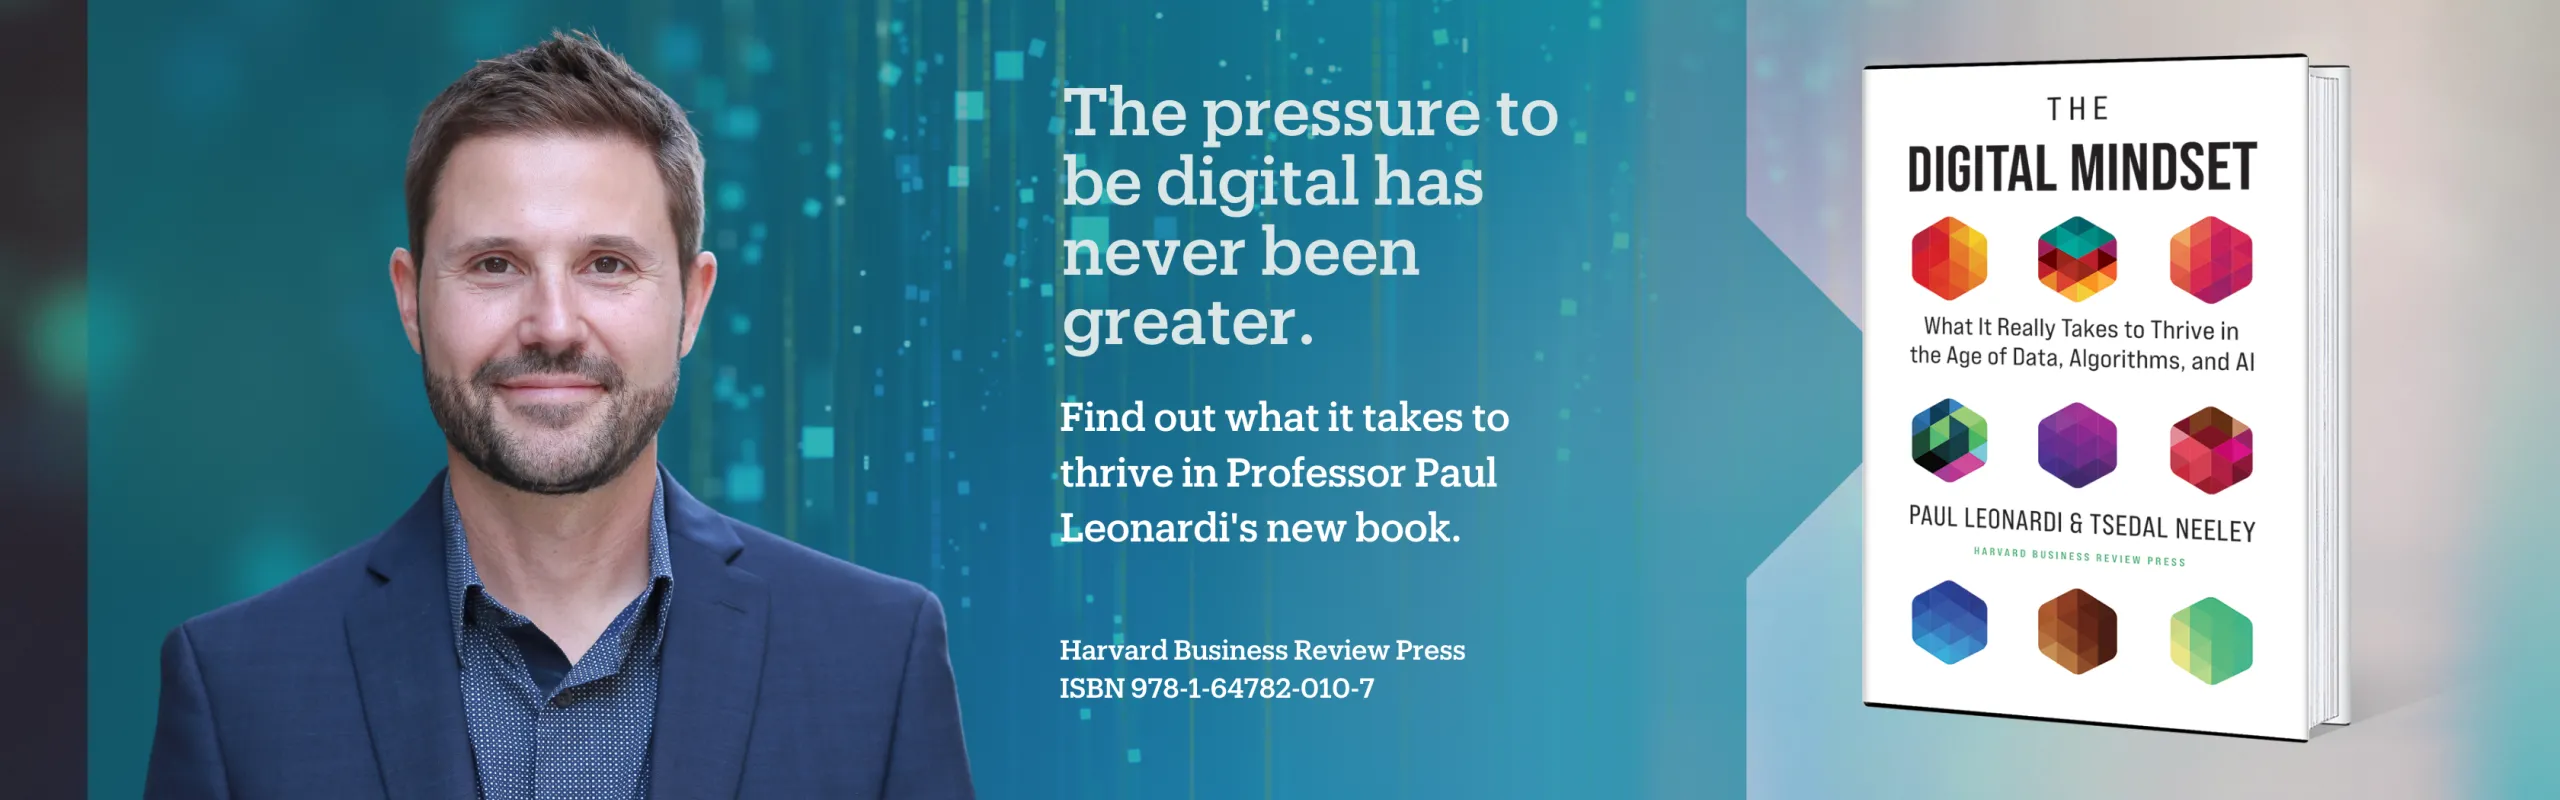 Picture of Paul Leonardi and his book, "The Digital Mindset" with text reading: The pressure to be digital has never been greater. Find out what it takes to thrive in Professor Paul Leonardi's new book. Harvard Business Review Press ISBN 978-1-64782-010-7